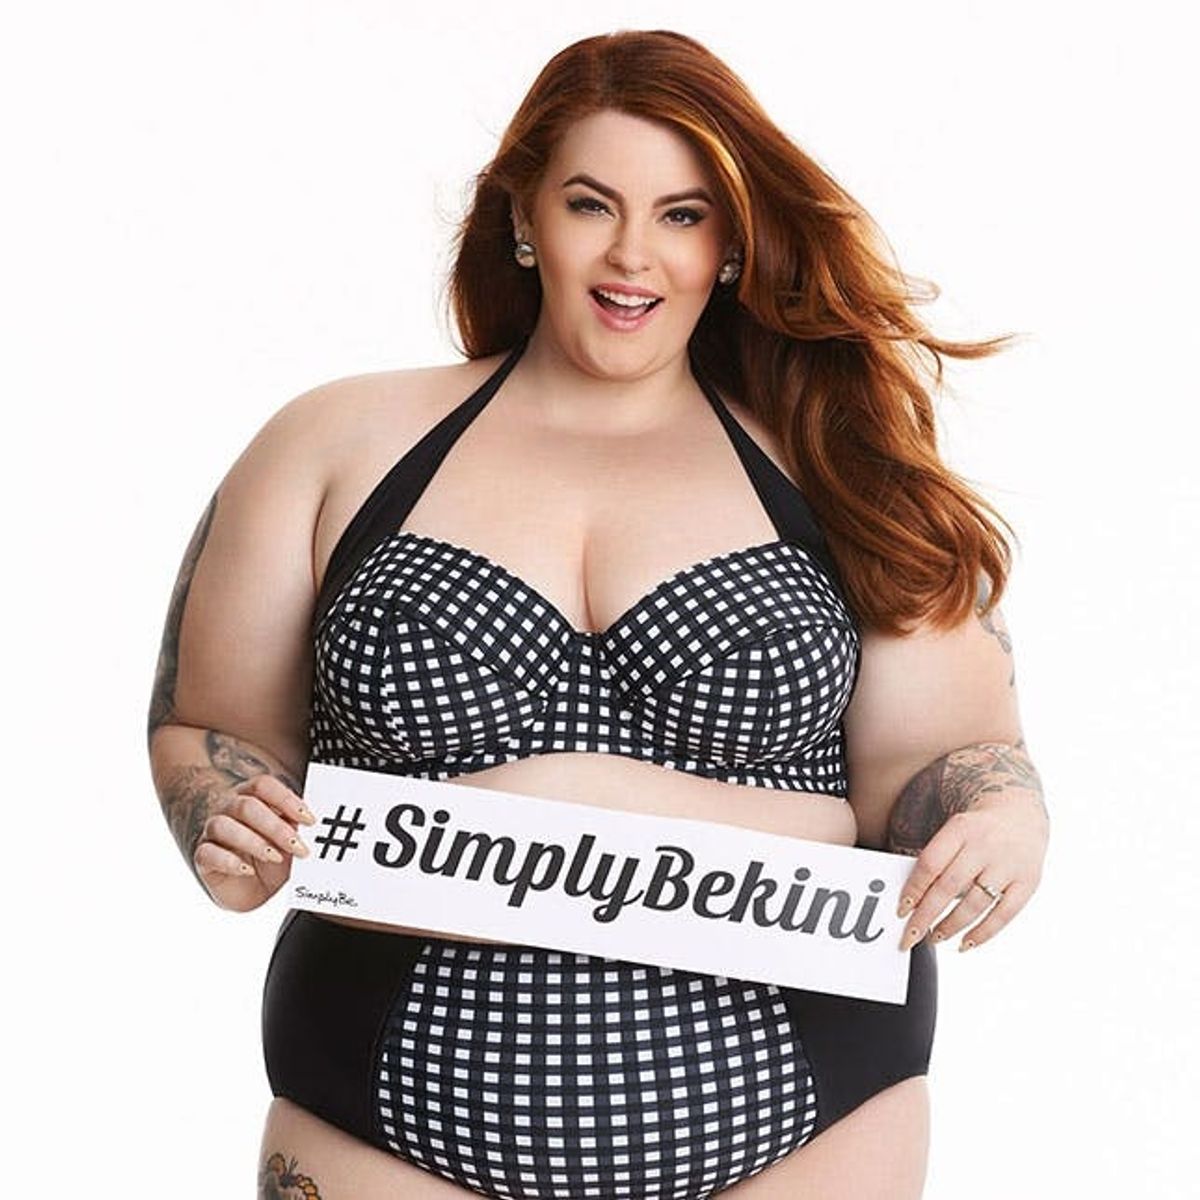 Watch Tess Holliday’s Empowering Video on How to Get a Bikini Body